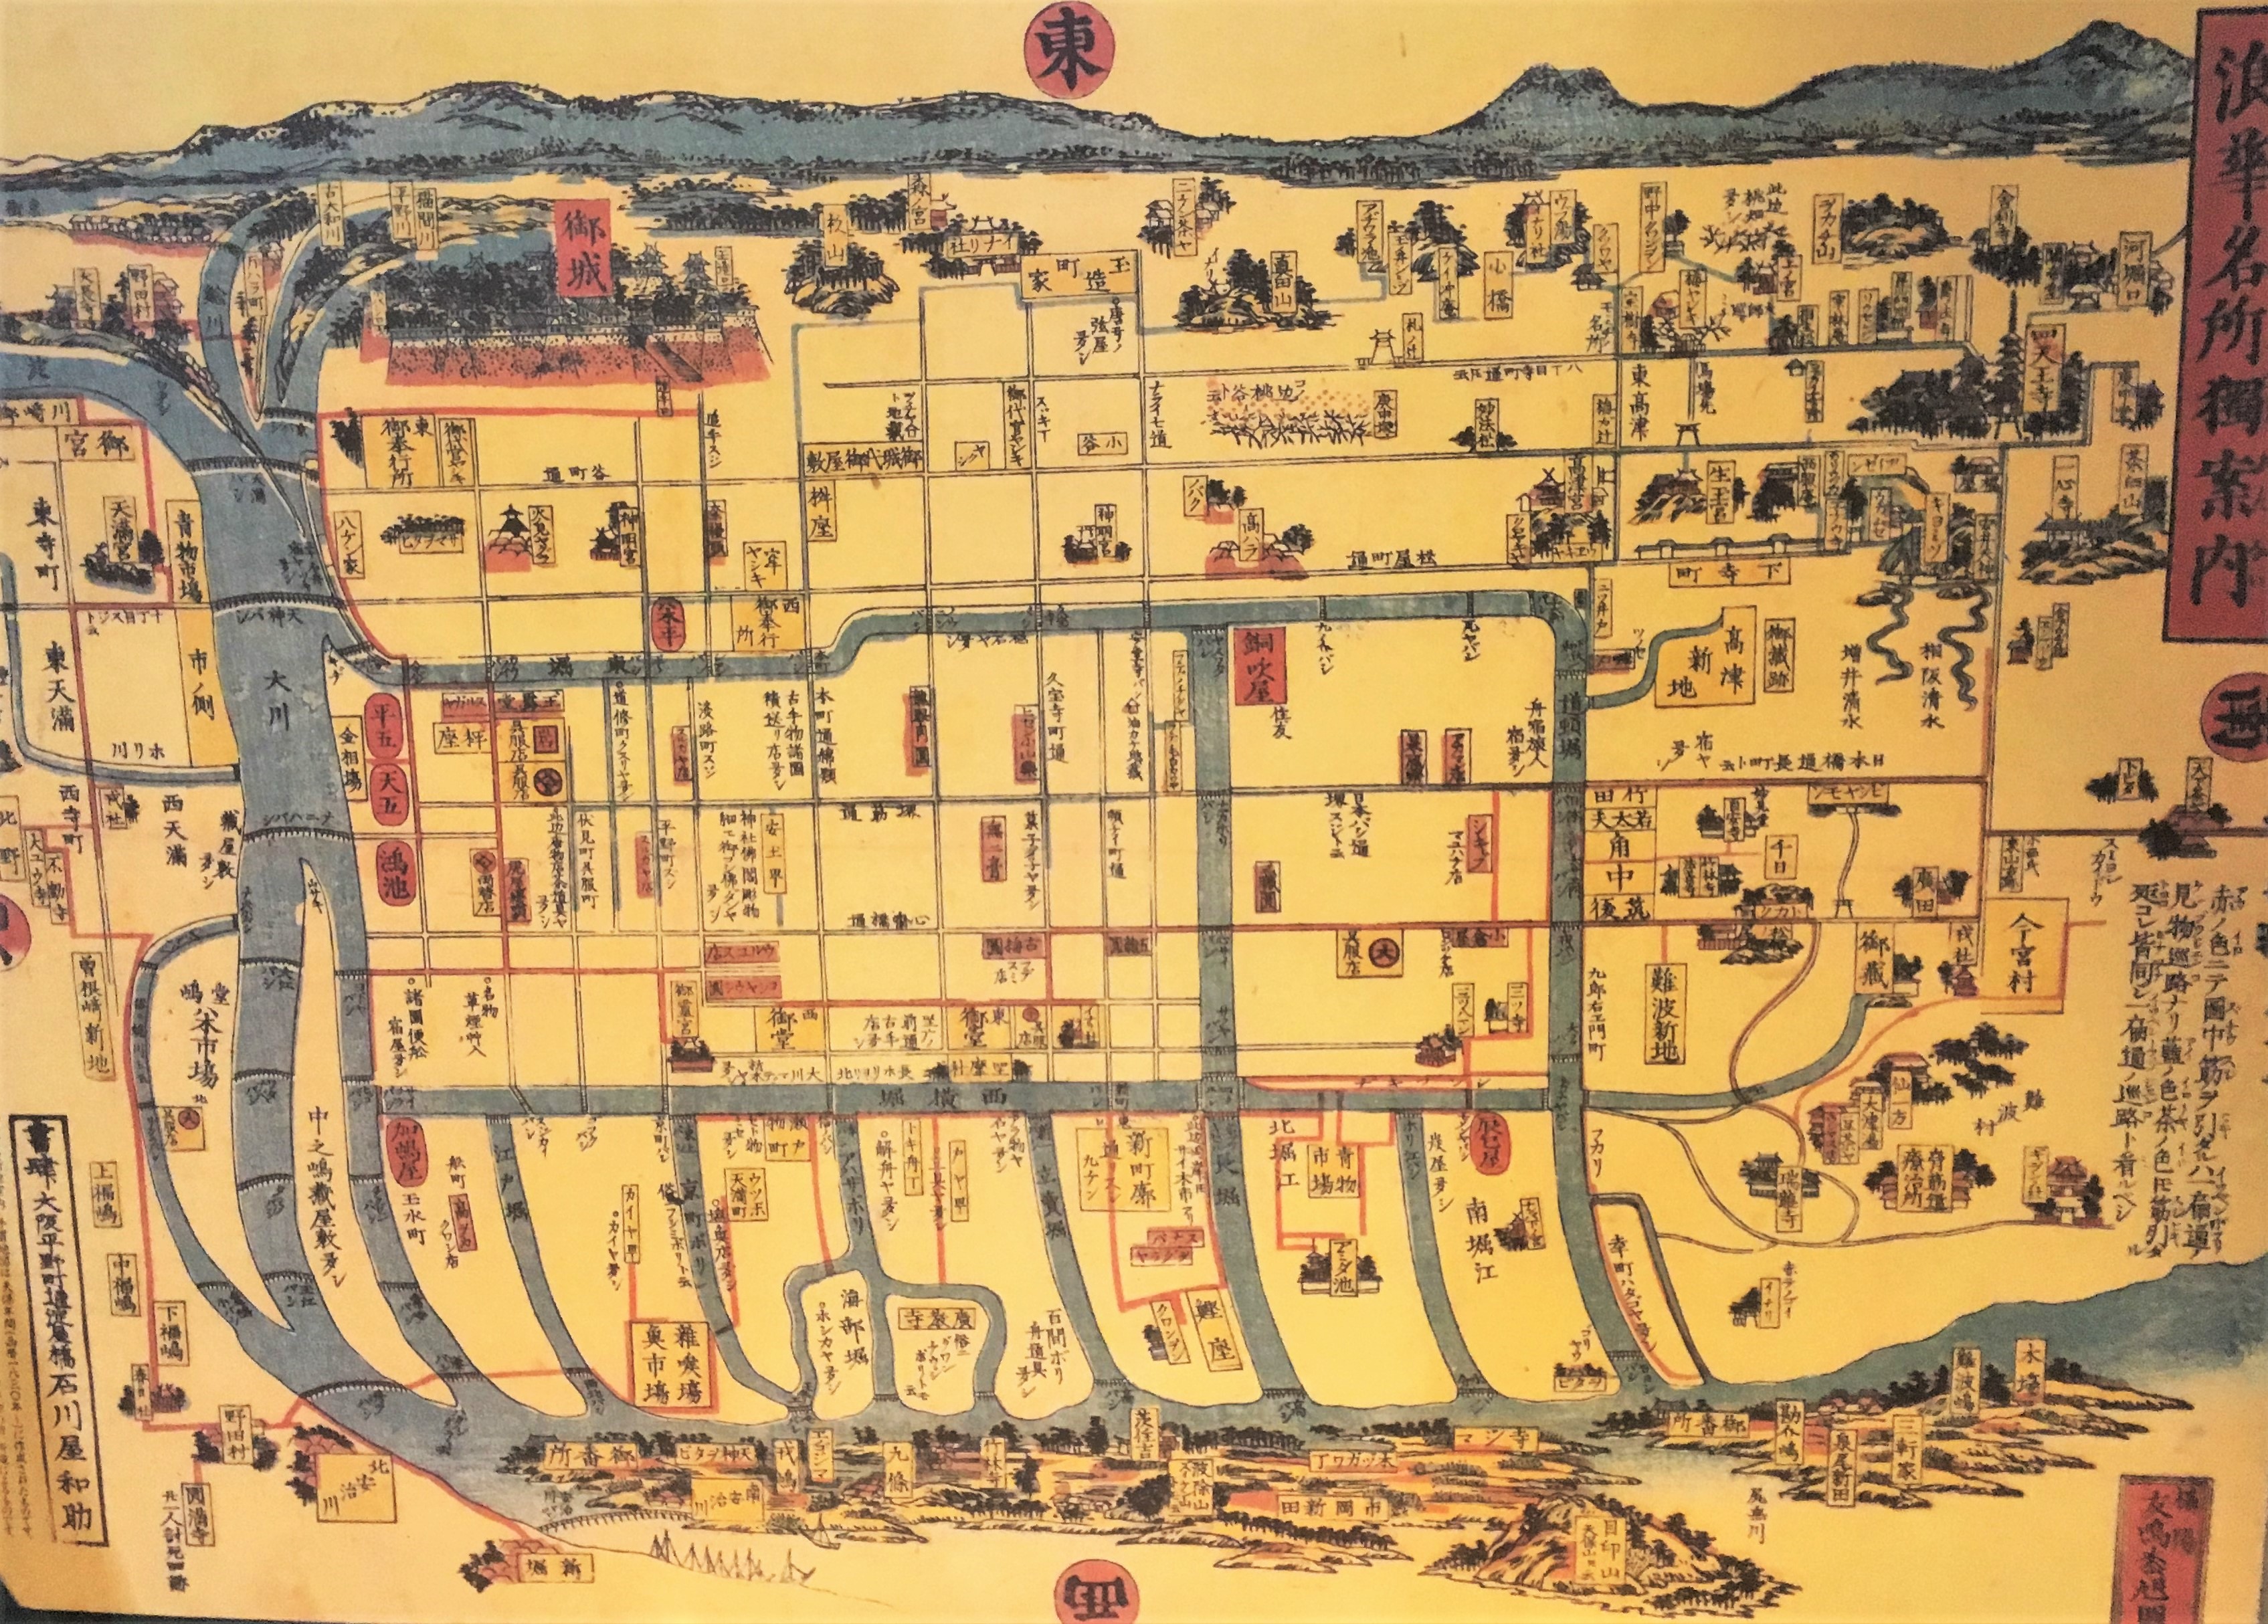 Old map of Osaka and all its rivers